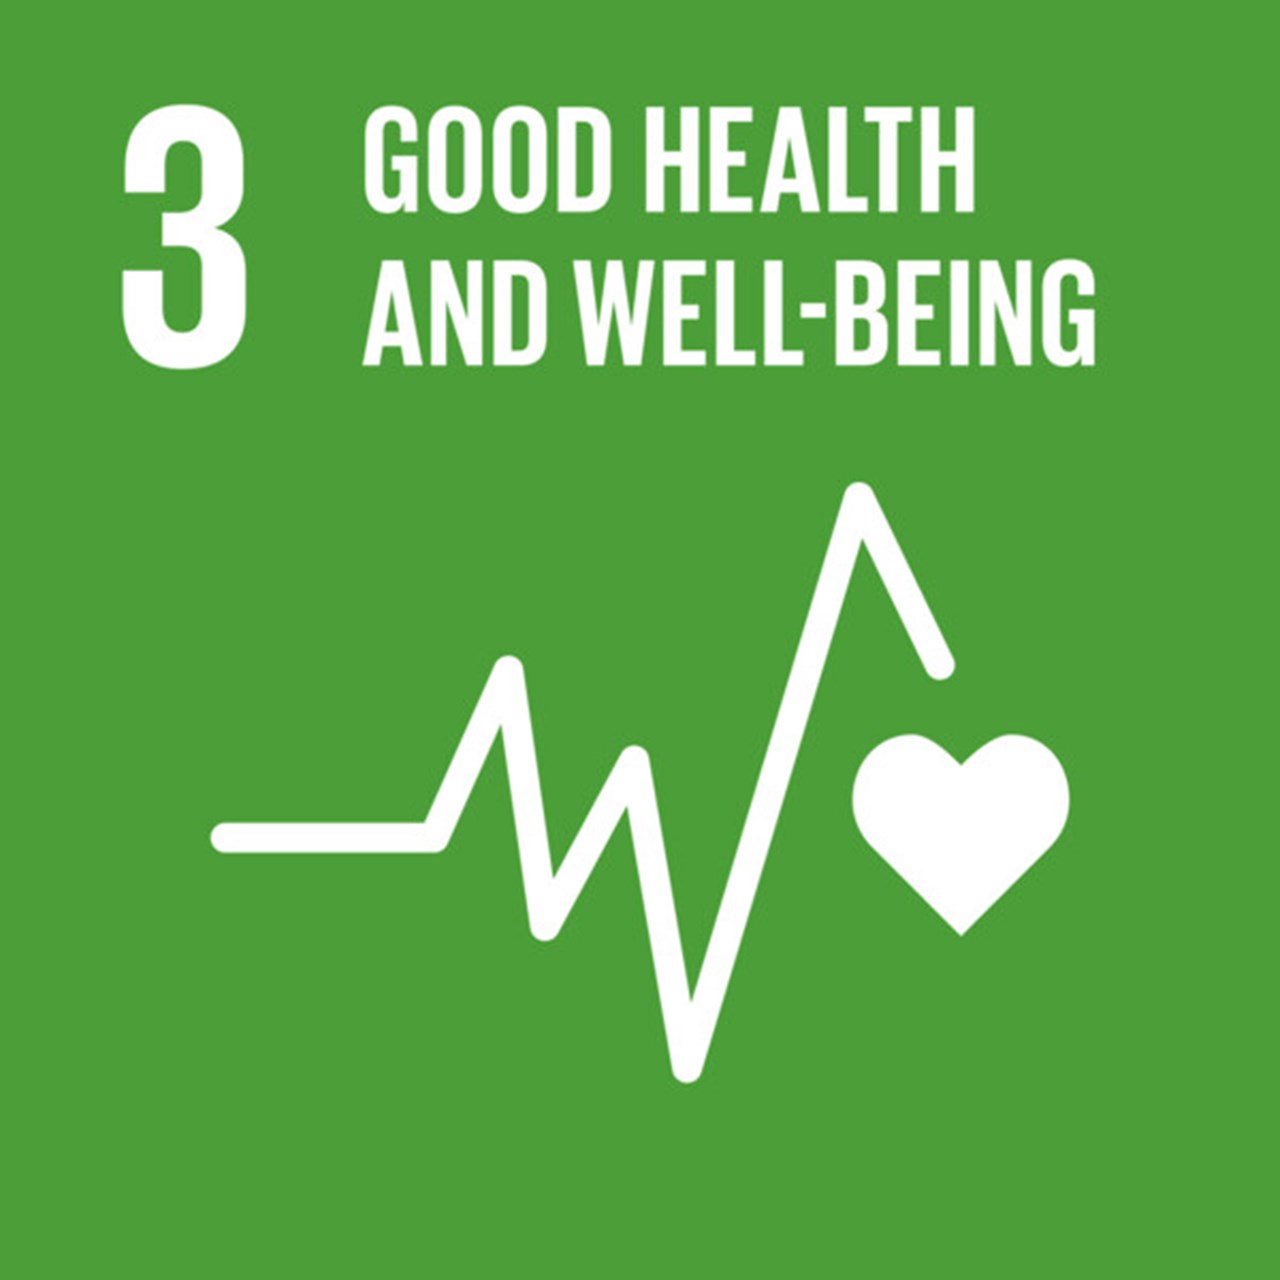 The Global Goals, Goal 3 - Good Health and Well-Being